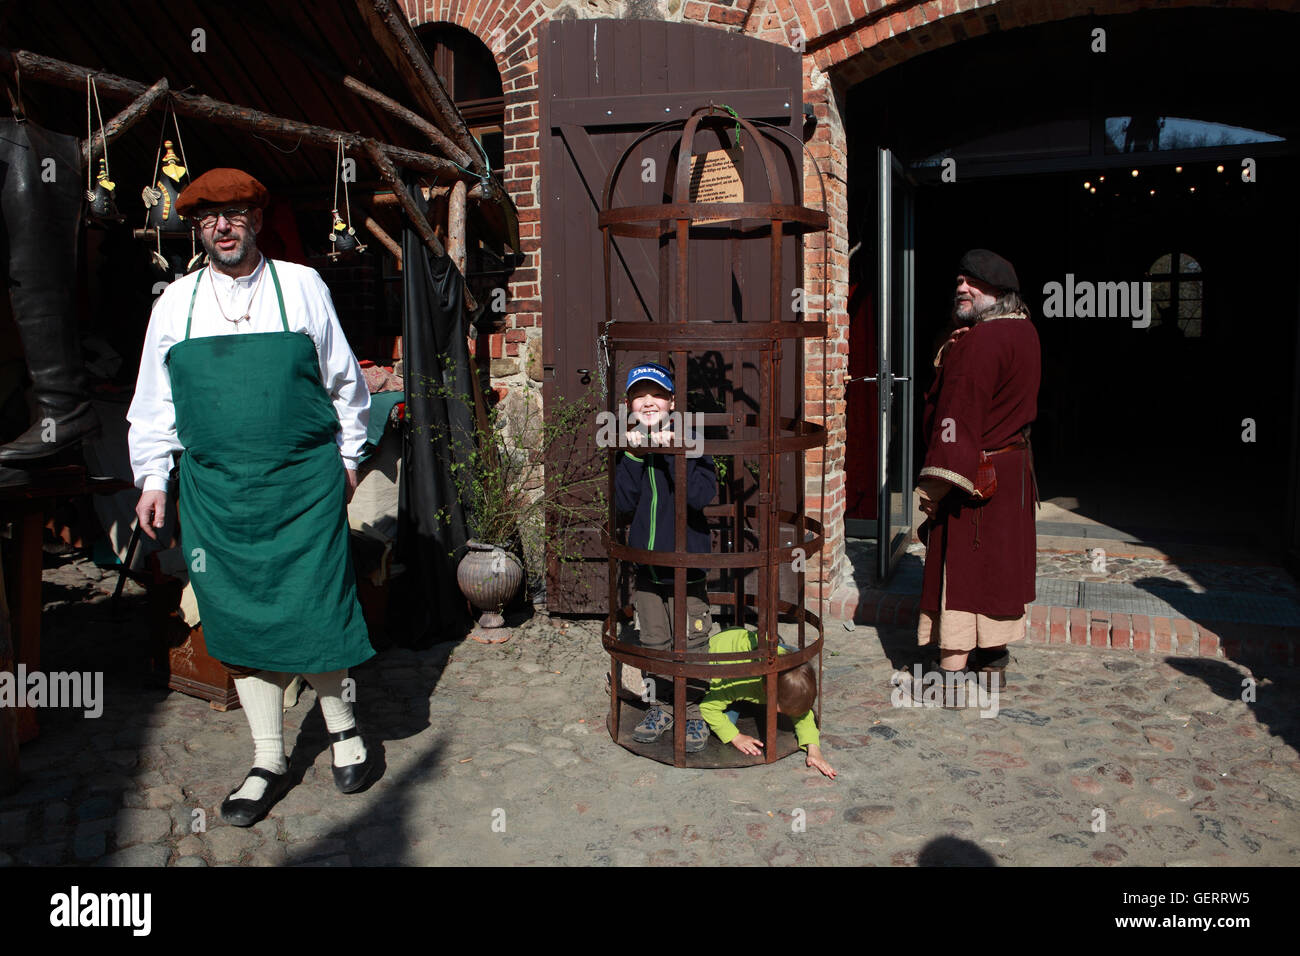 Rabenstein, Germany, children are locked up in a medieval festival in a cage Stock Photo